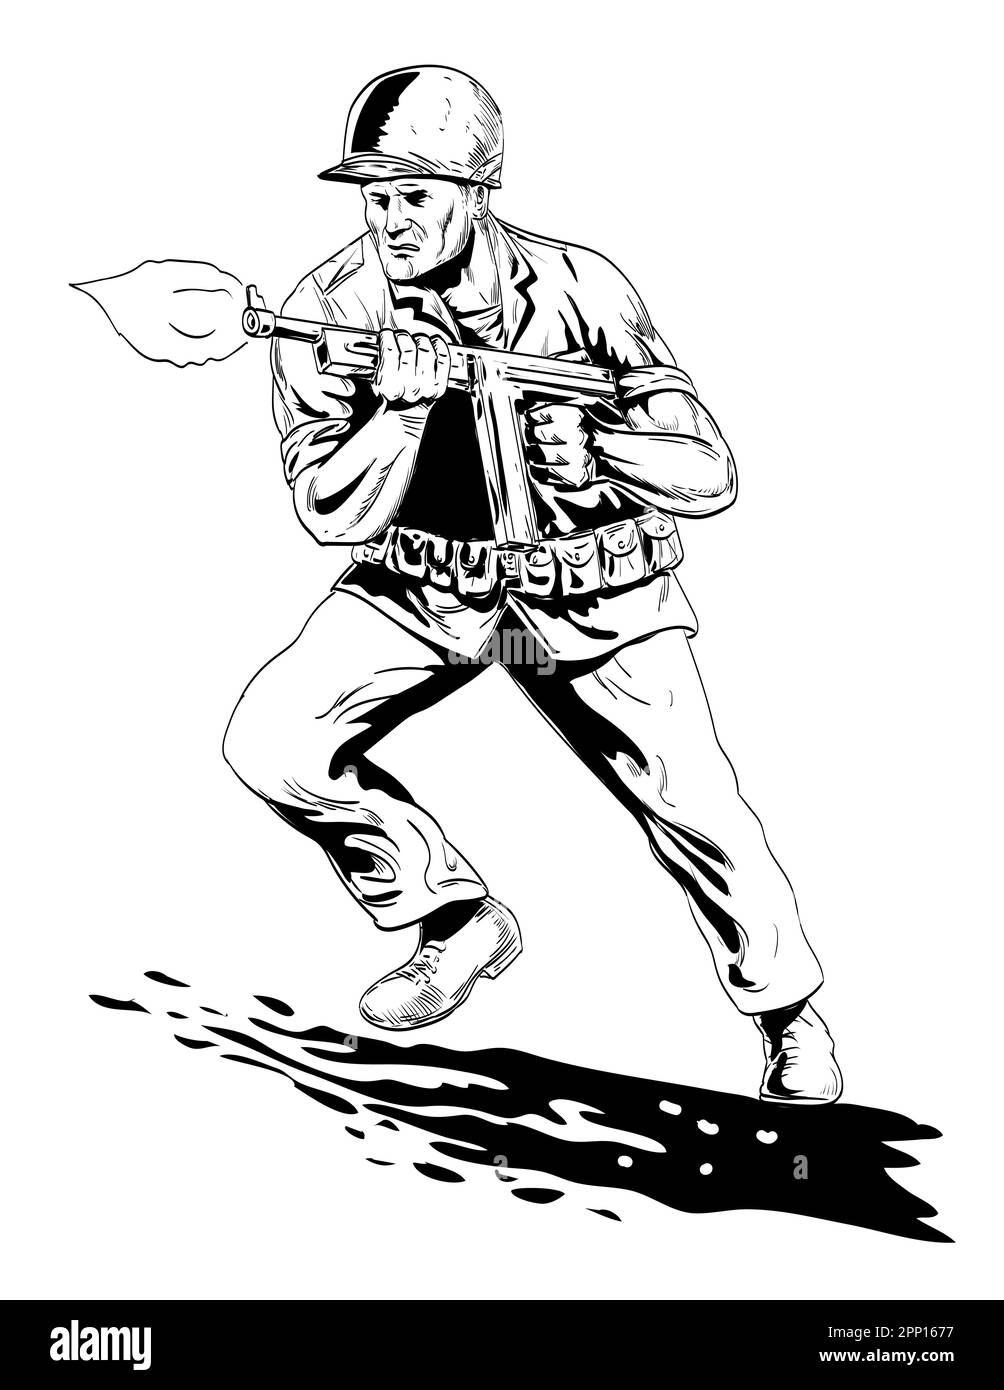 Comics style drawing or illustration of a World War Two American GI soldier running firing tommy gun viewed from front on isolated background done in Stock Photo